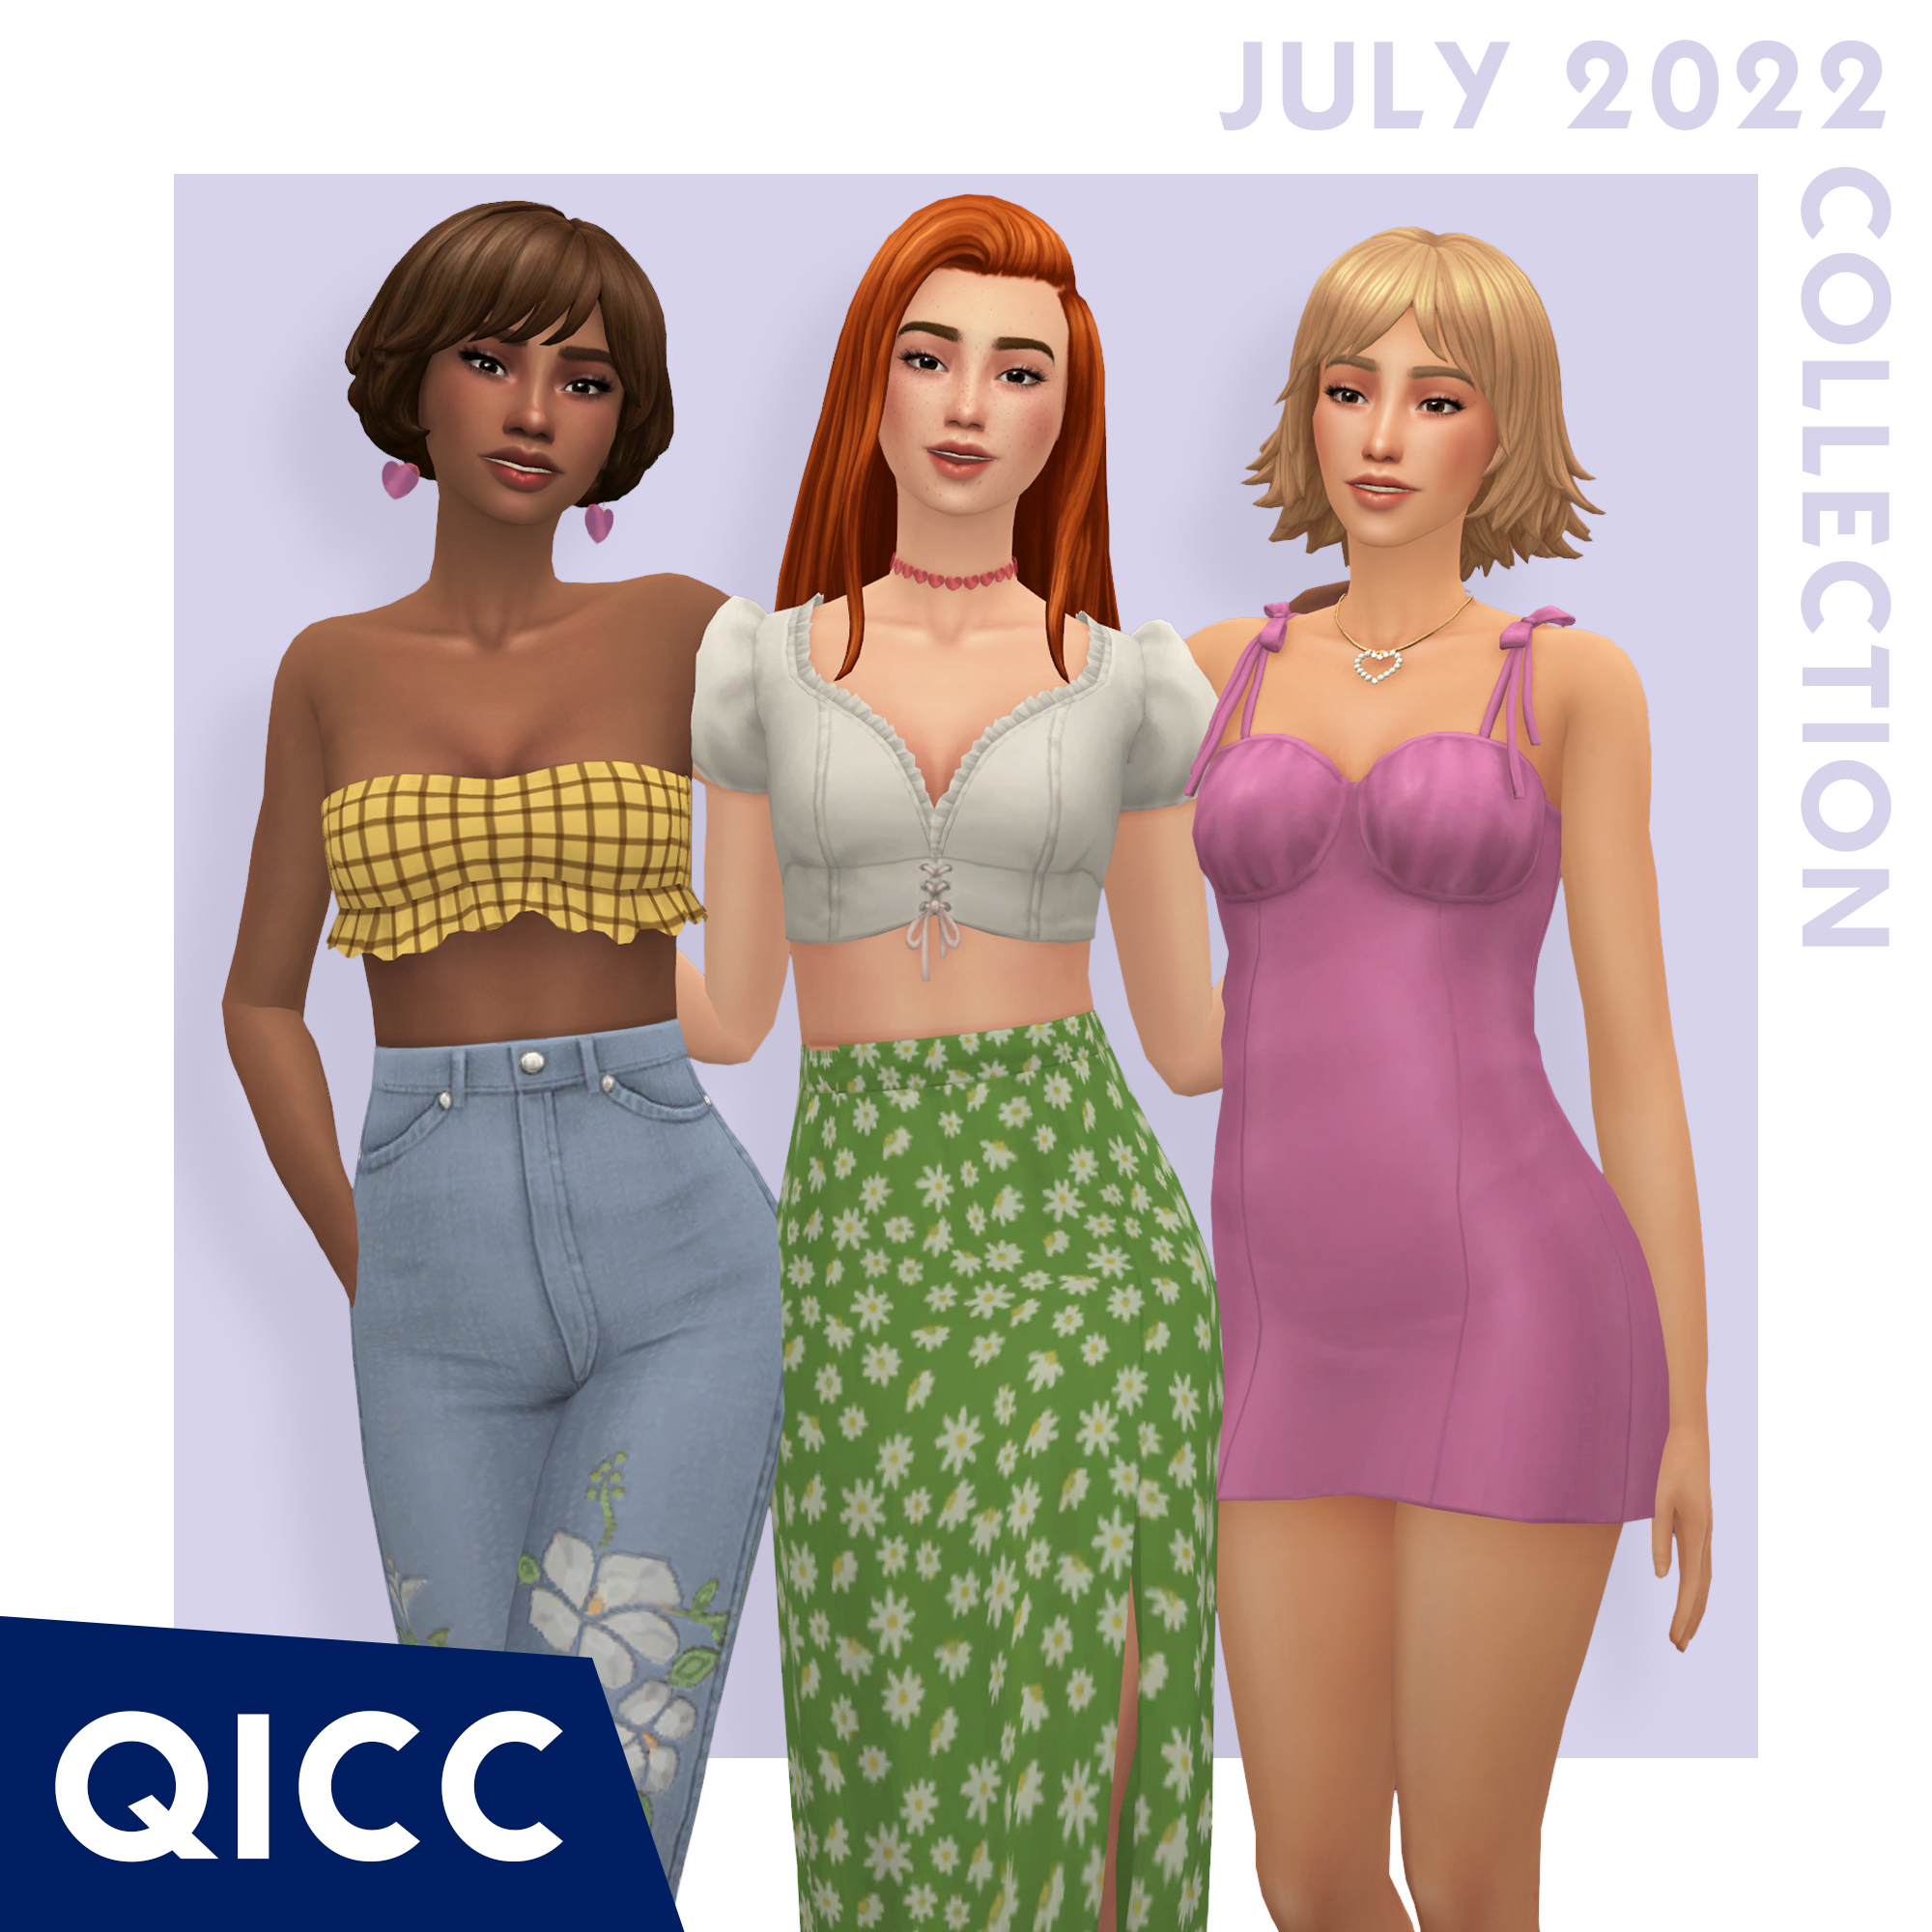 QICC - July 2022 Collection project avatar